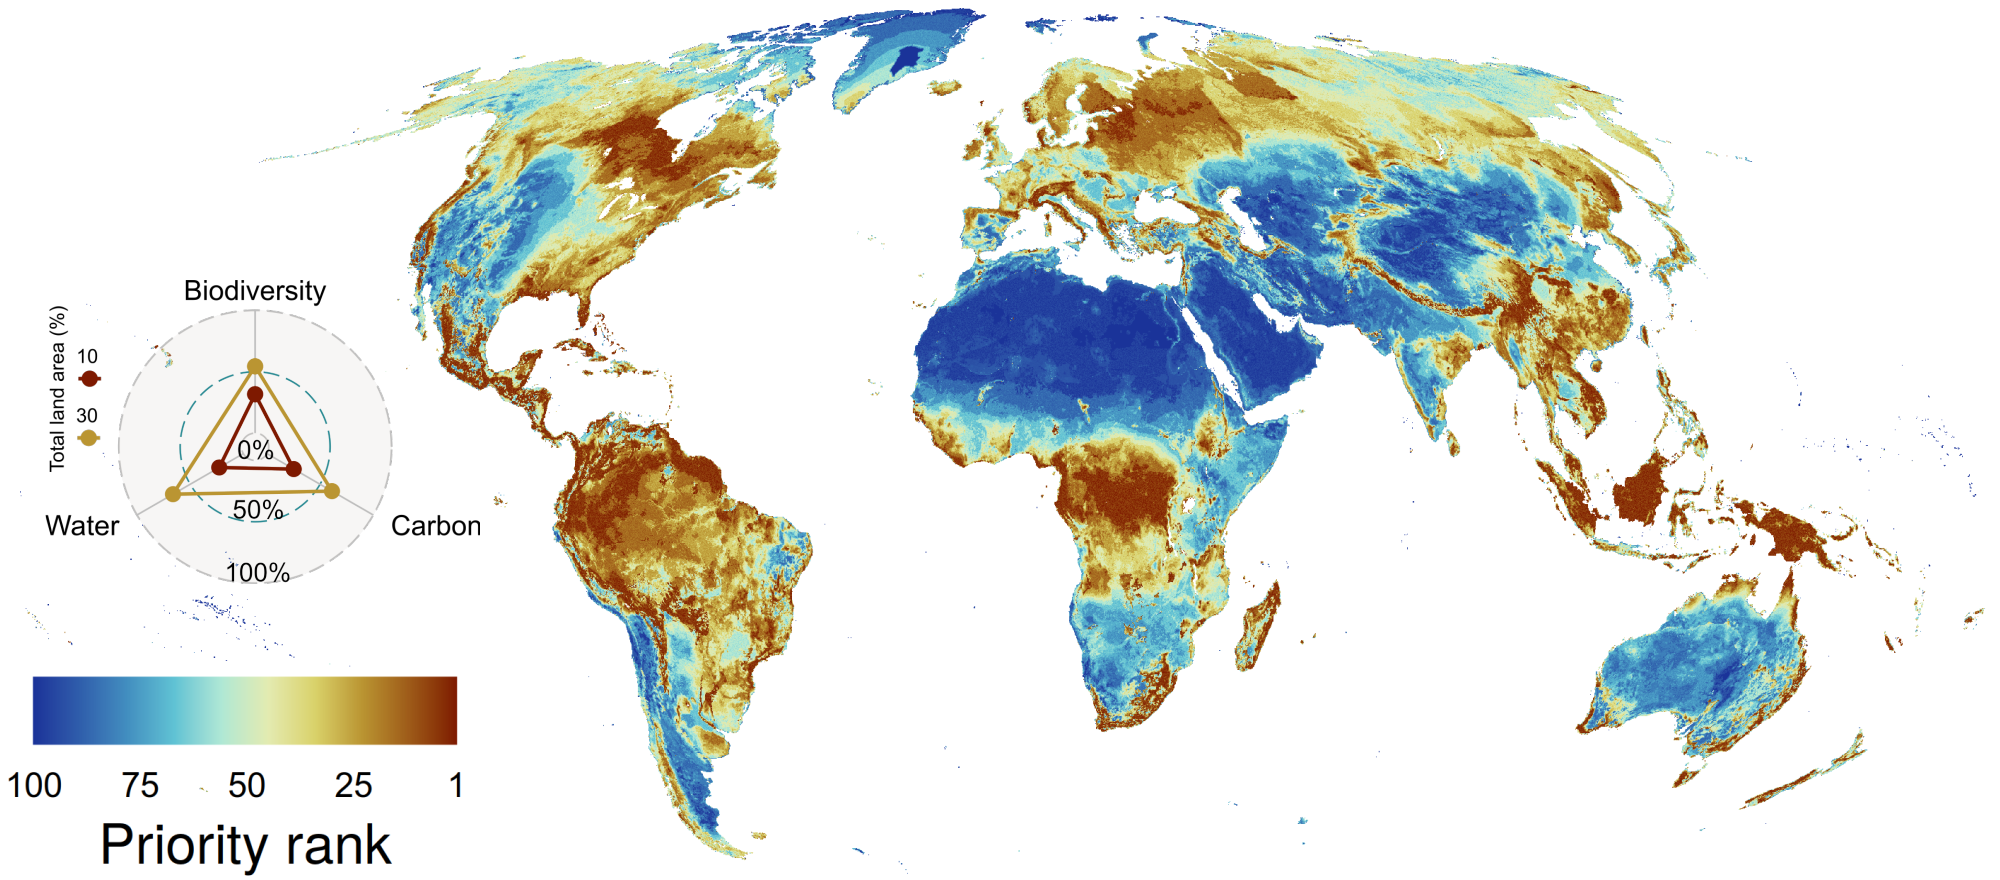 Areas of global conservation importance